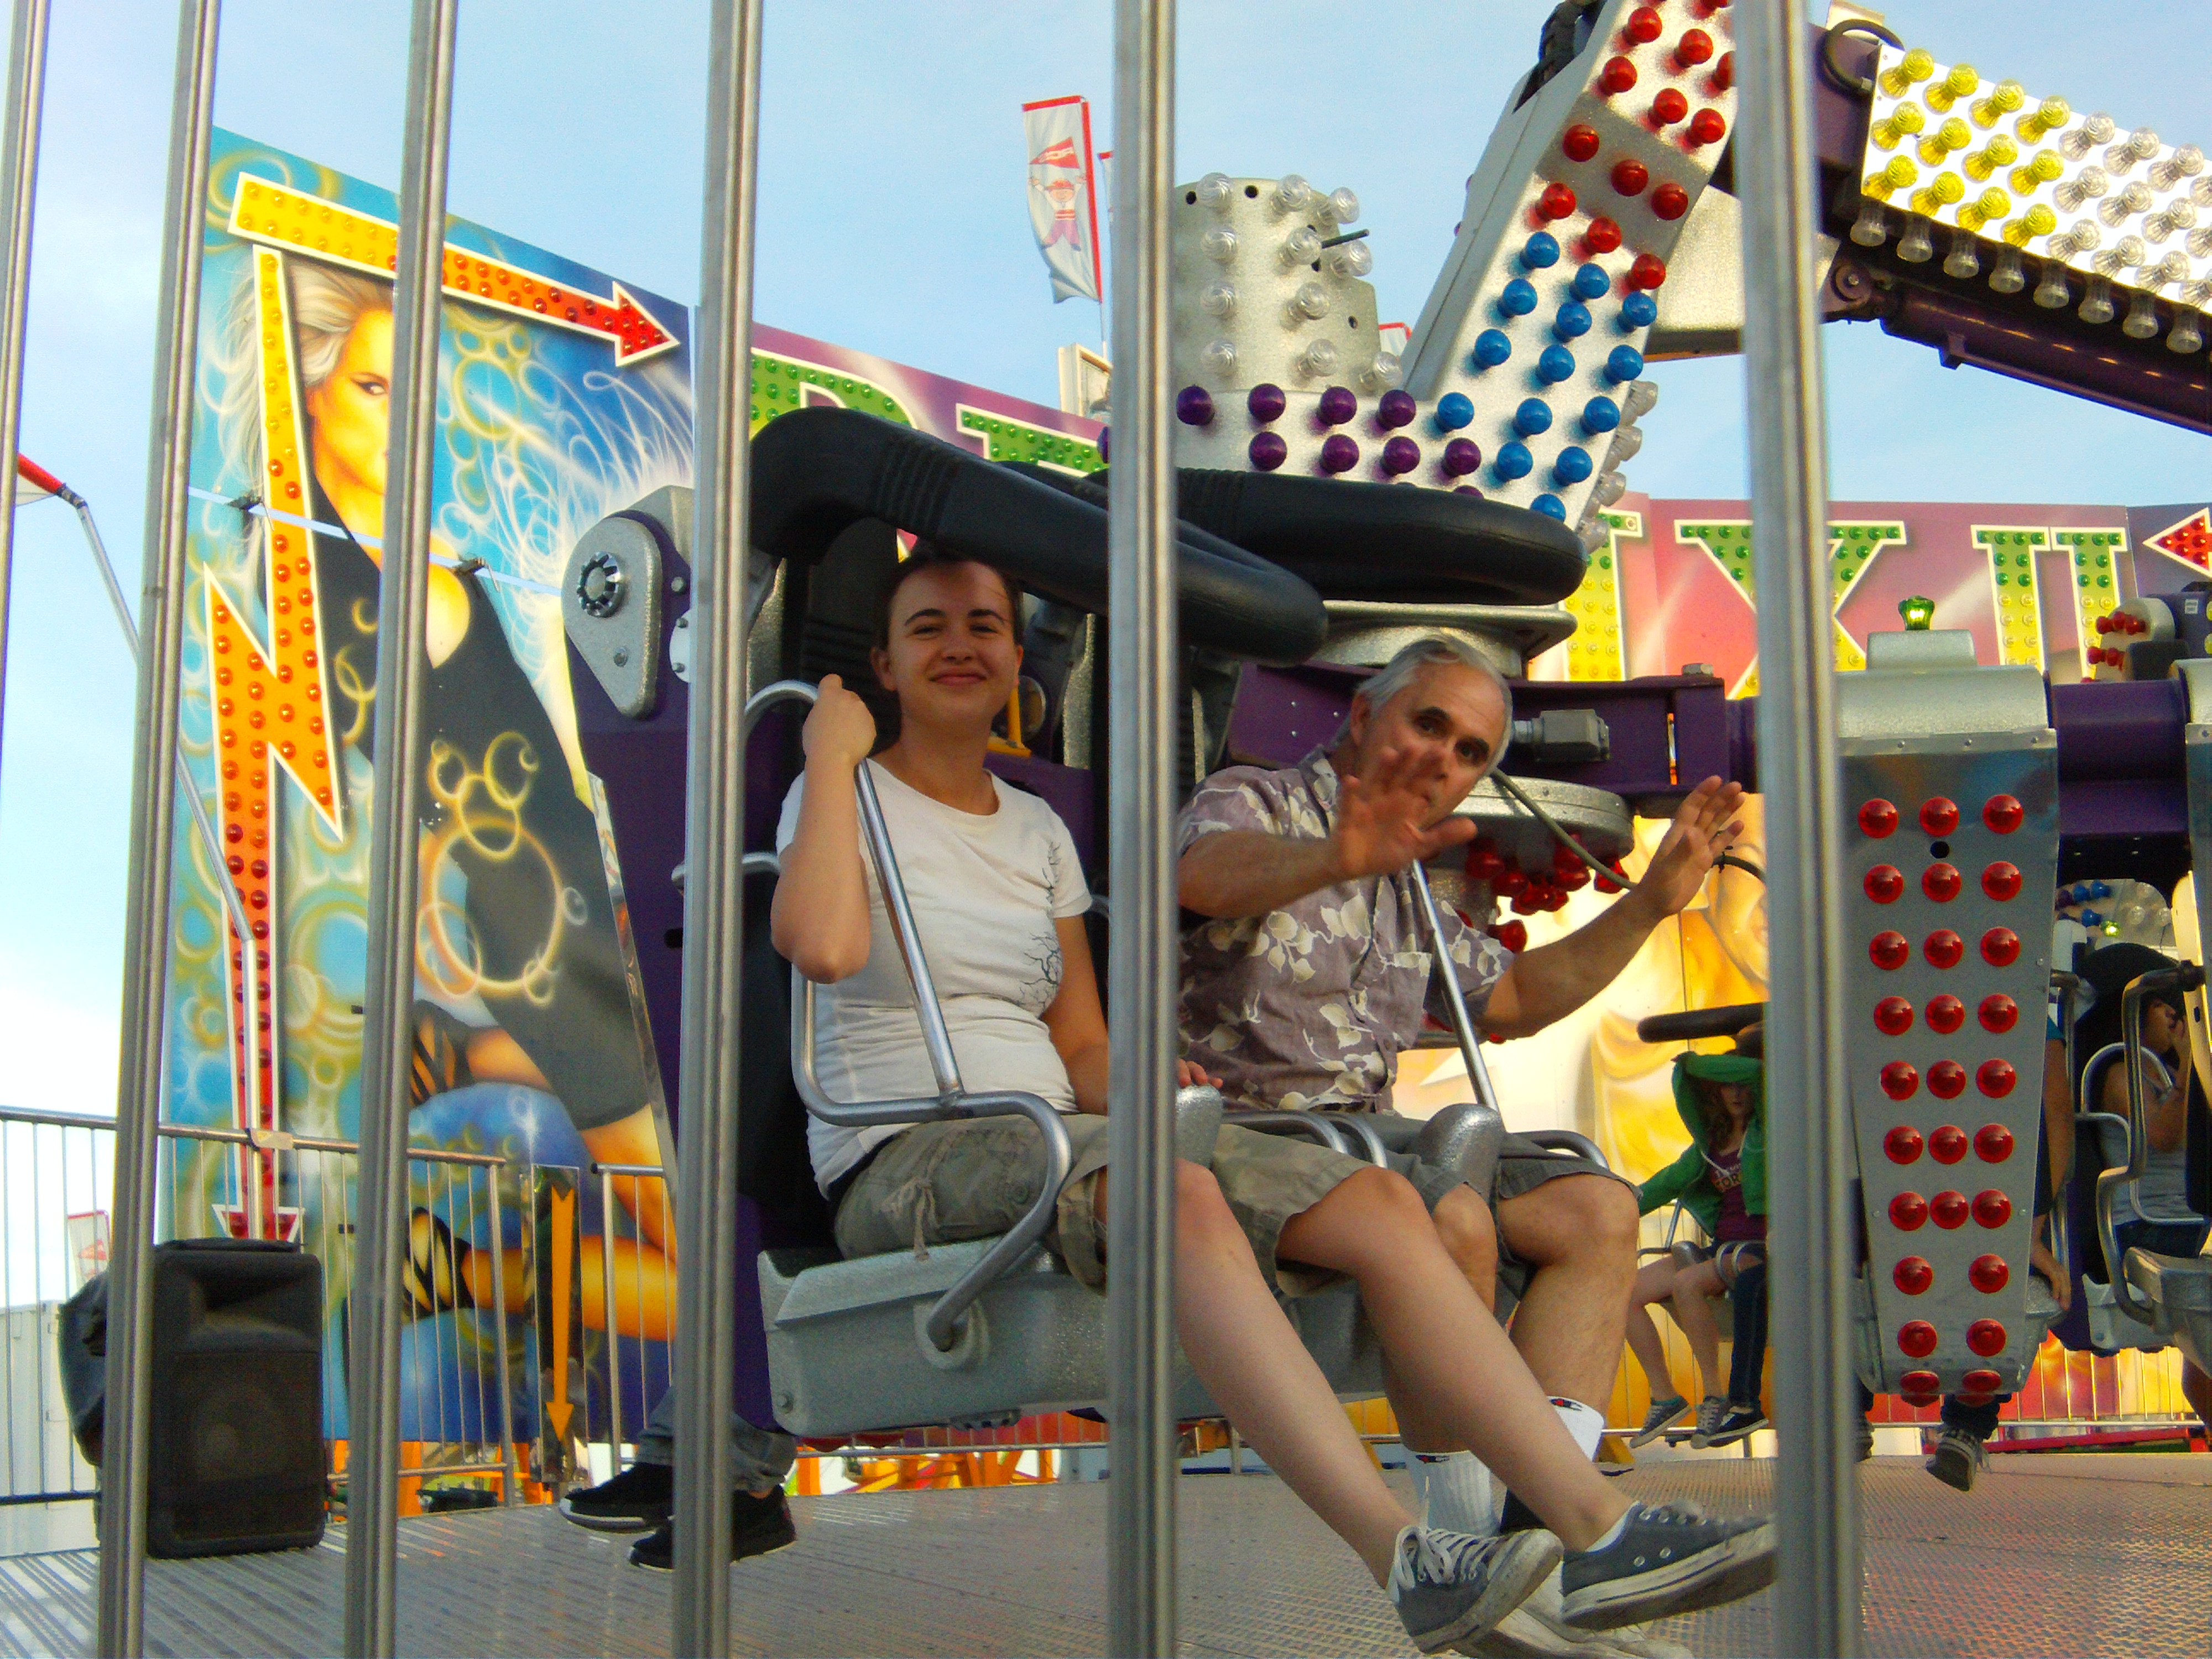 Morgan Graham and Aly Graham ready to twist and spin at the Pima County Fair, April 22, 2011